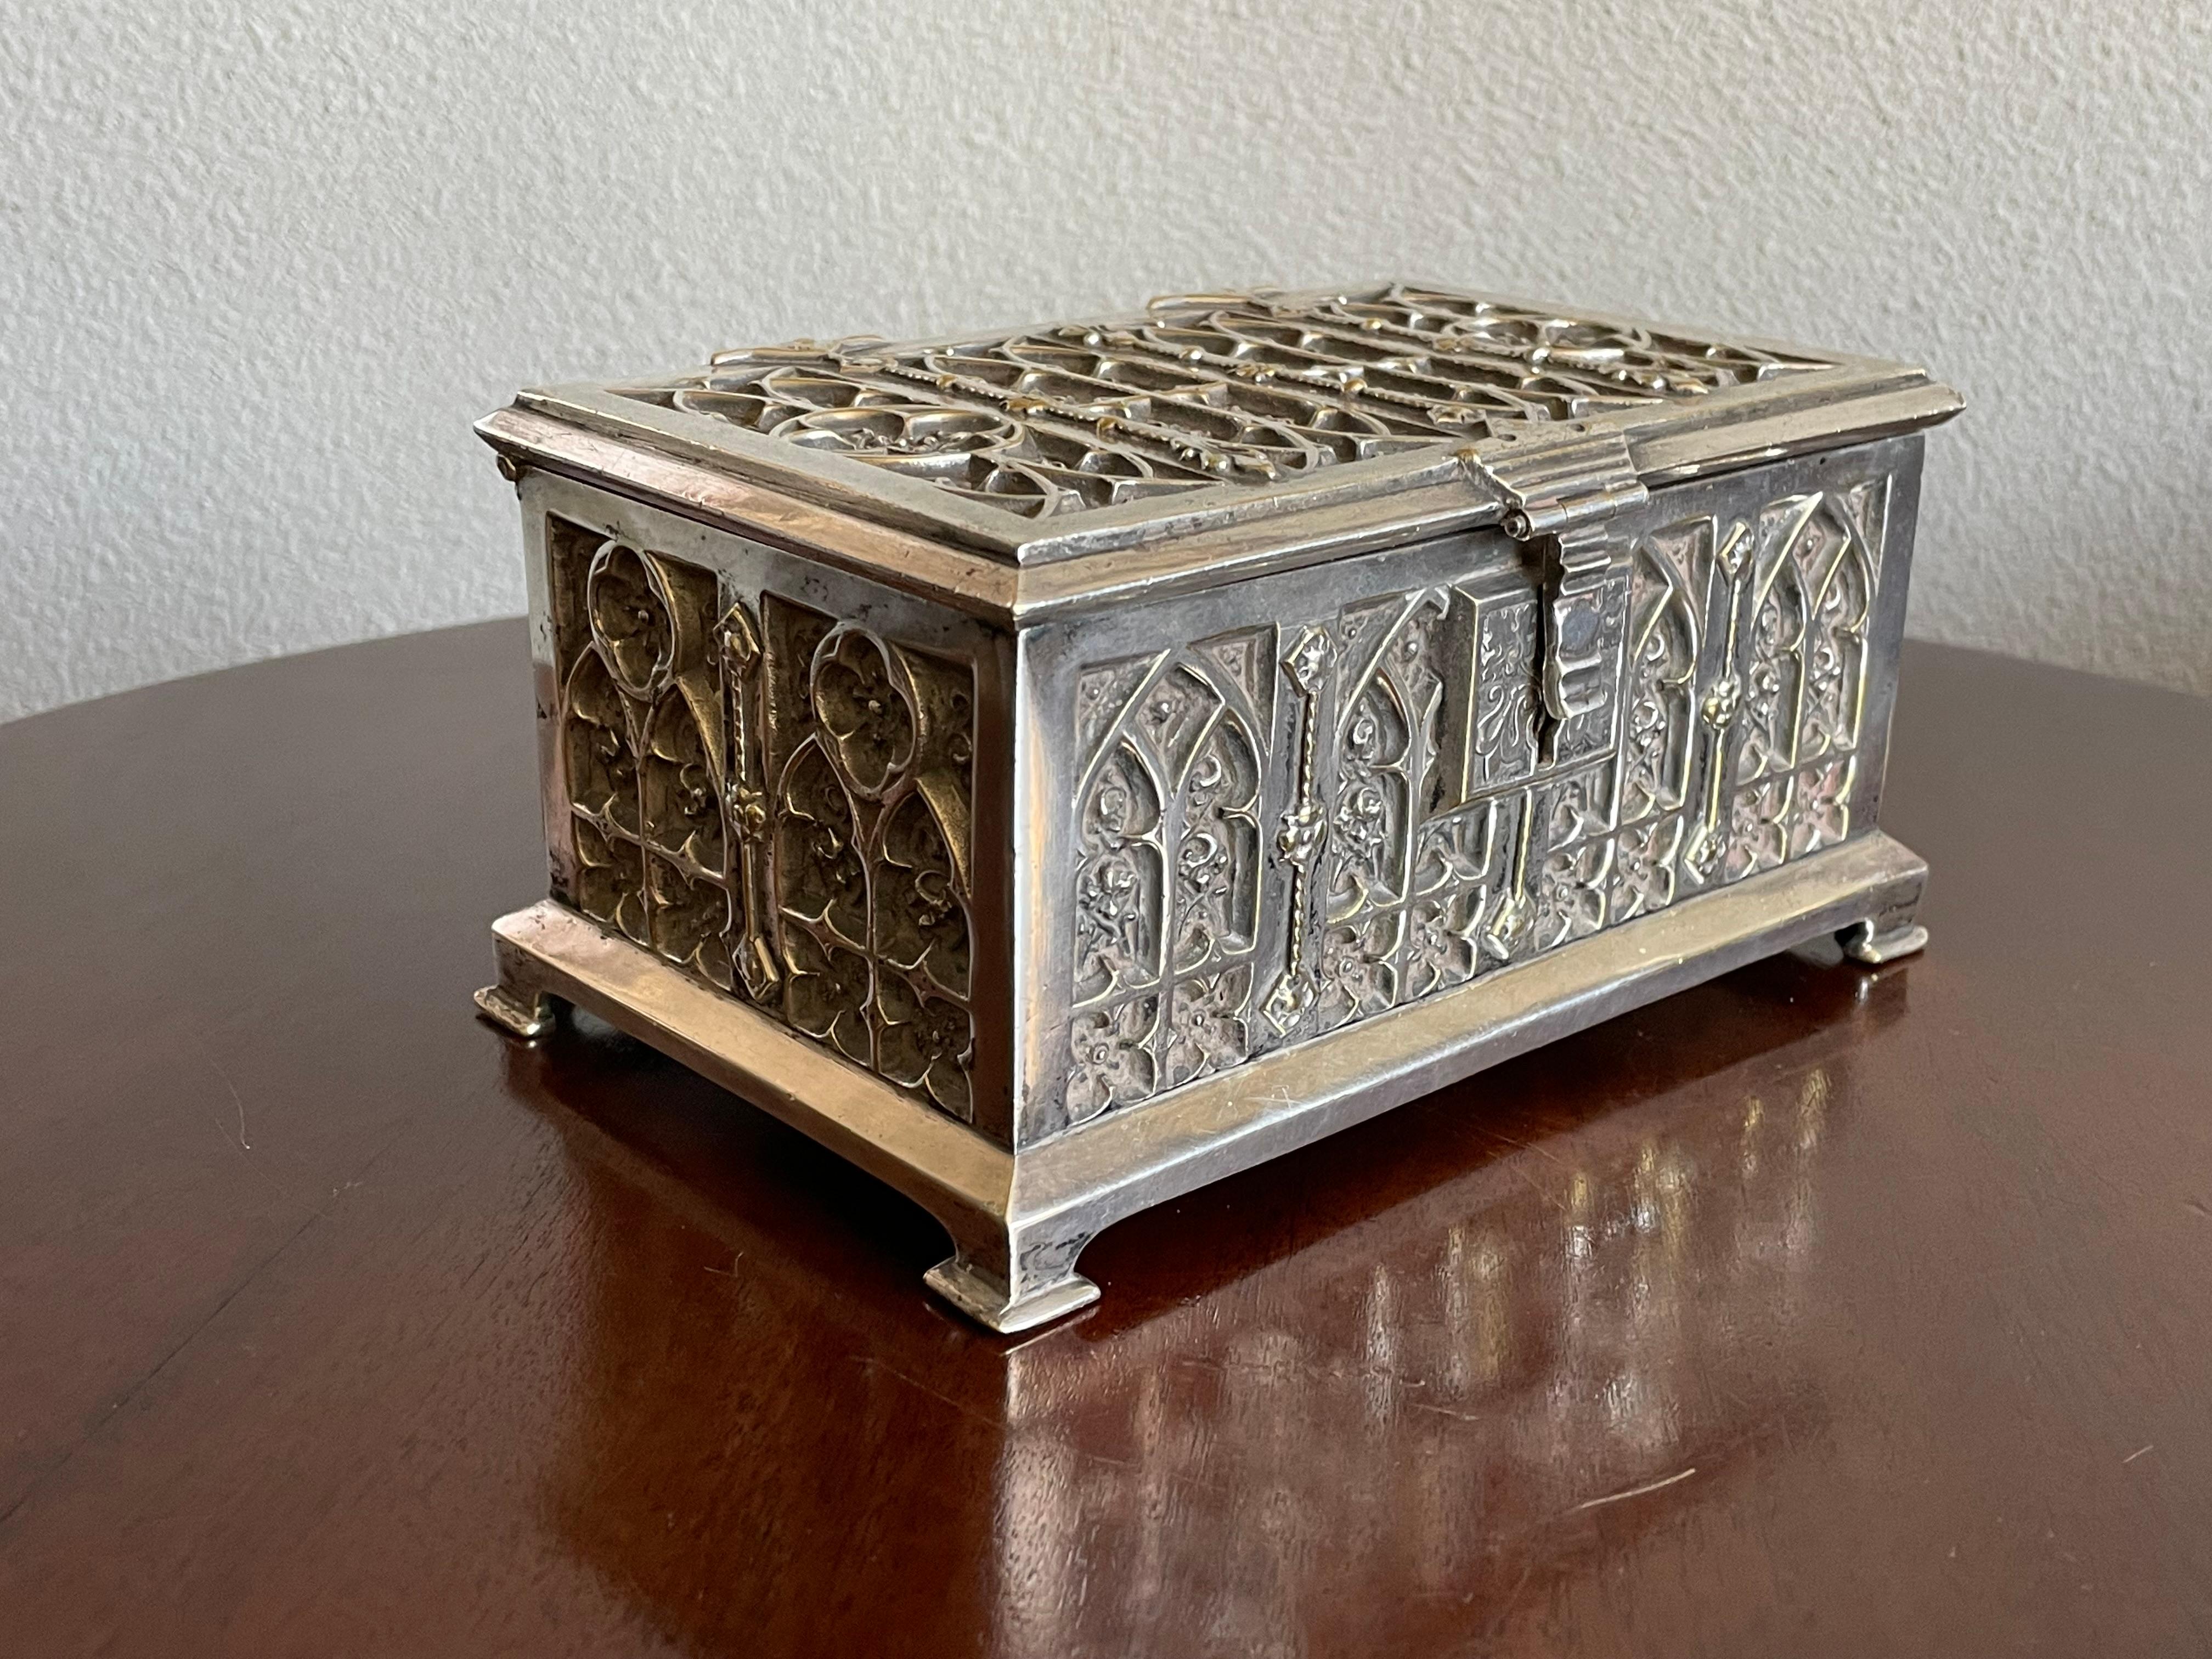 Stunning Gothic Revival Silvered Bronze Jewelry Box with Church Window Panels 9